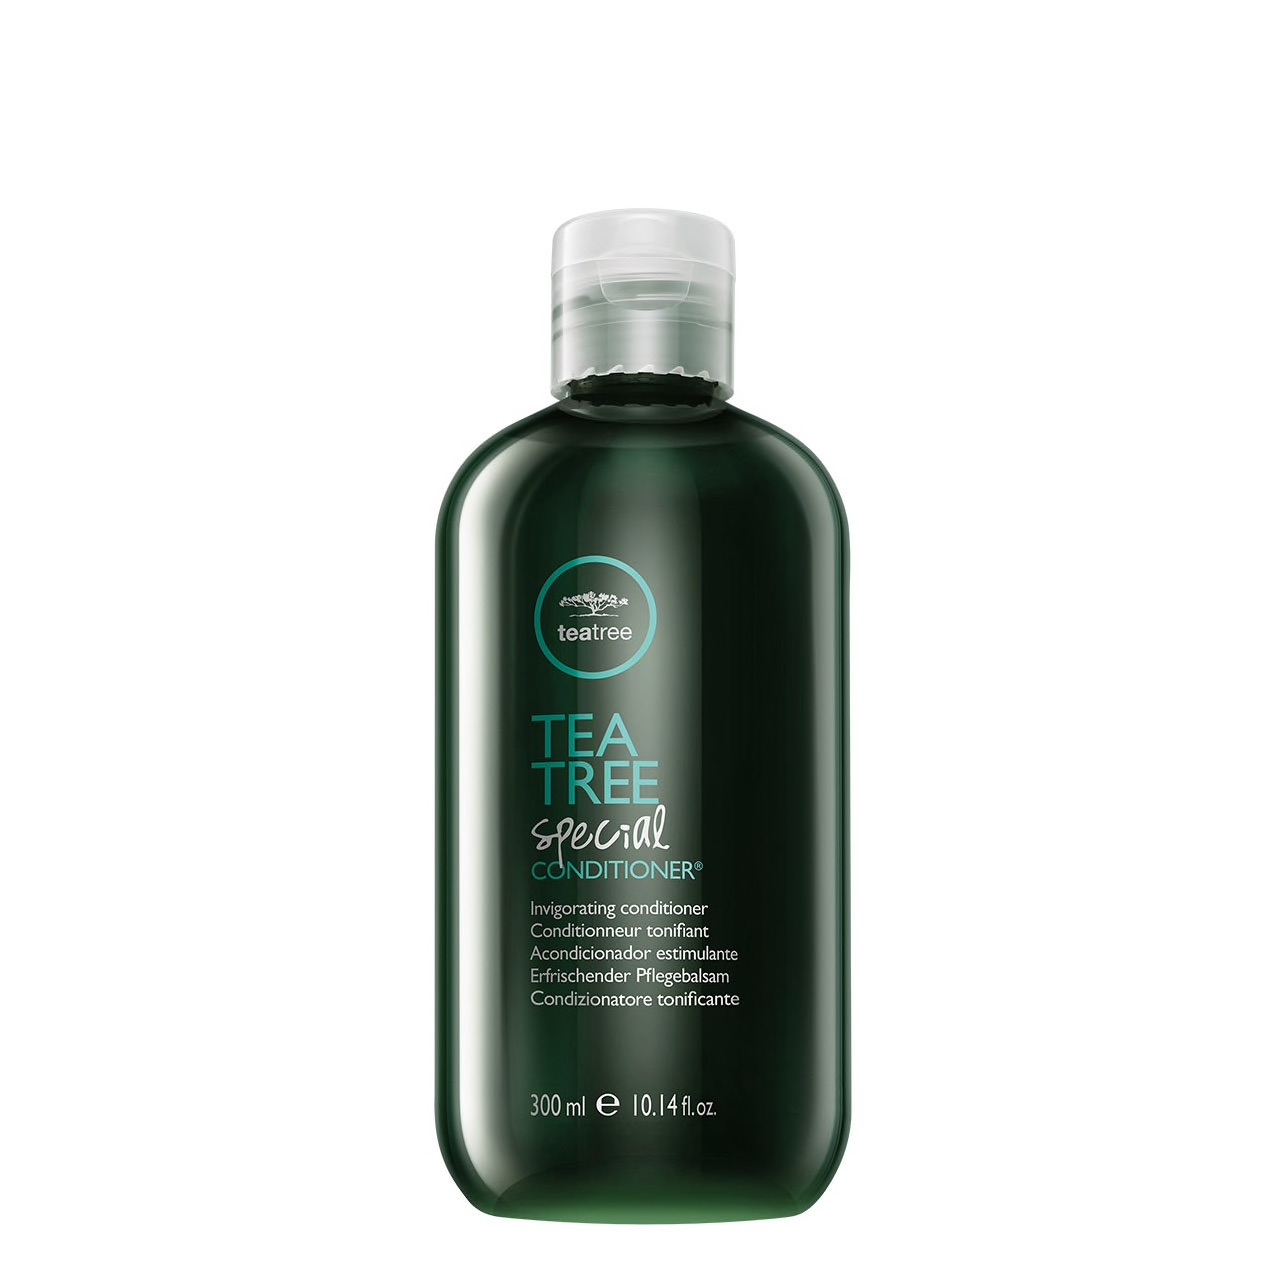 Tea Tree Special Conditioner BY Paul Mitchell